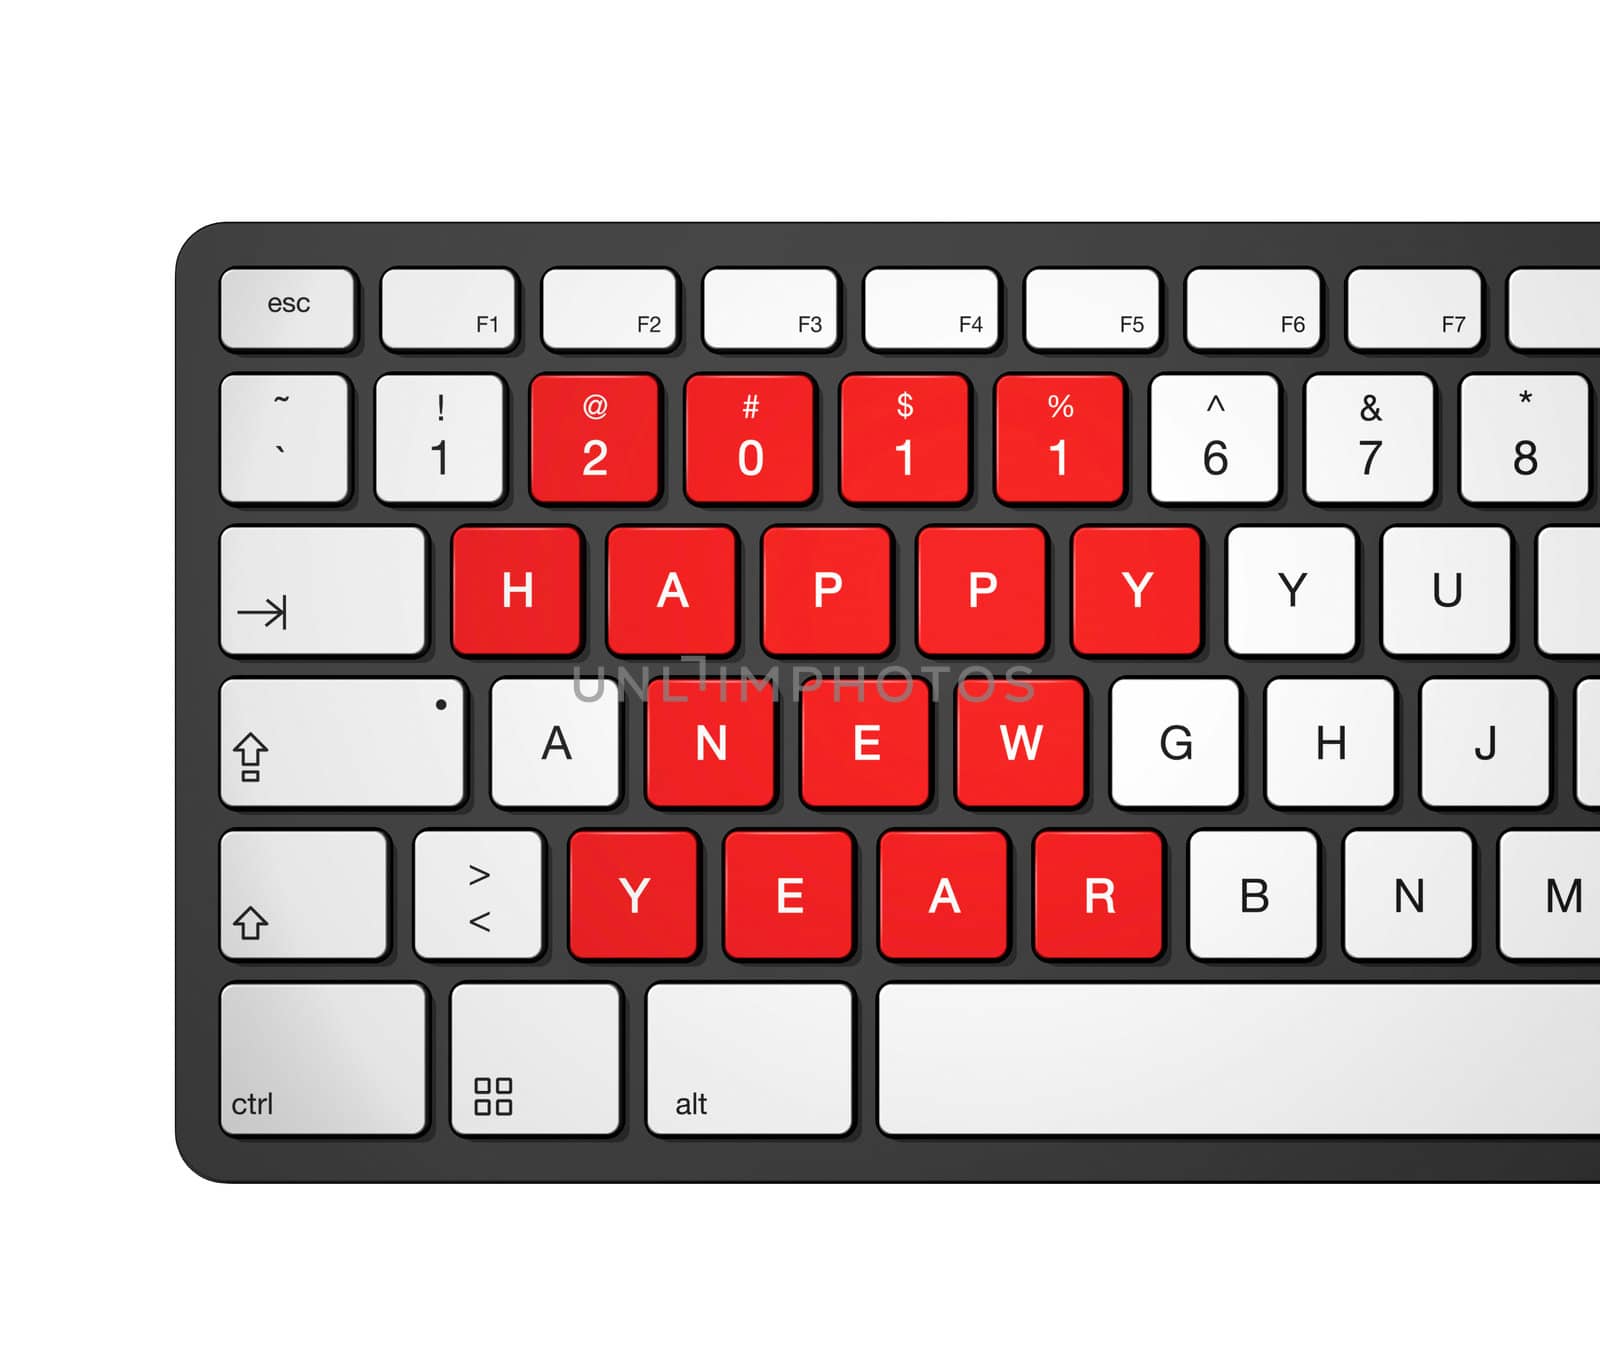 New year 2011 computer keyboard by daboost